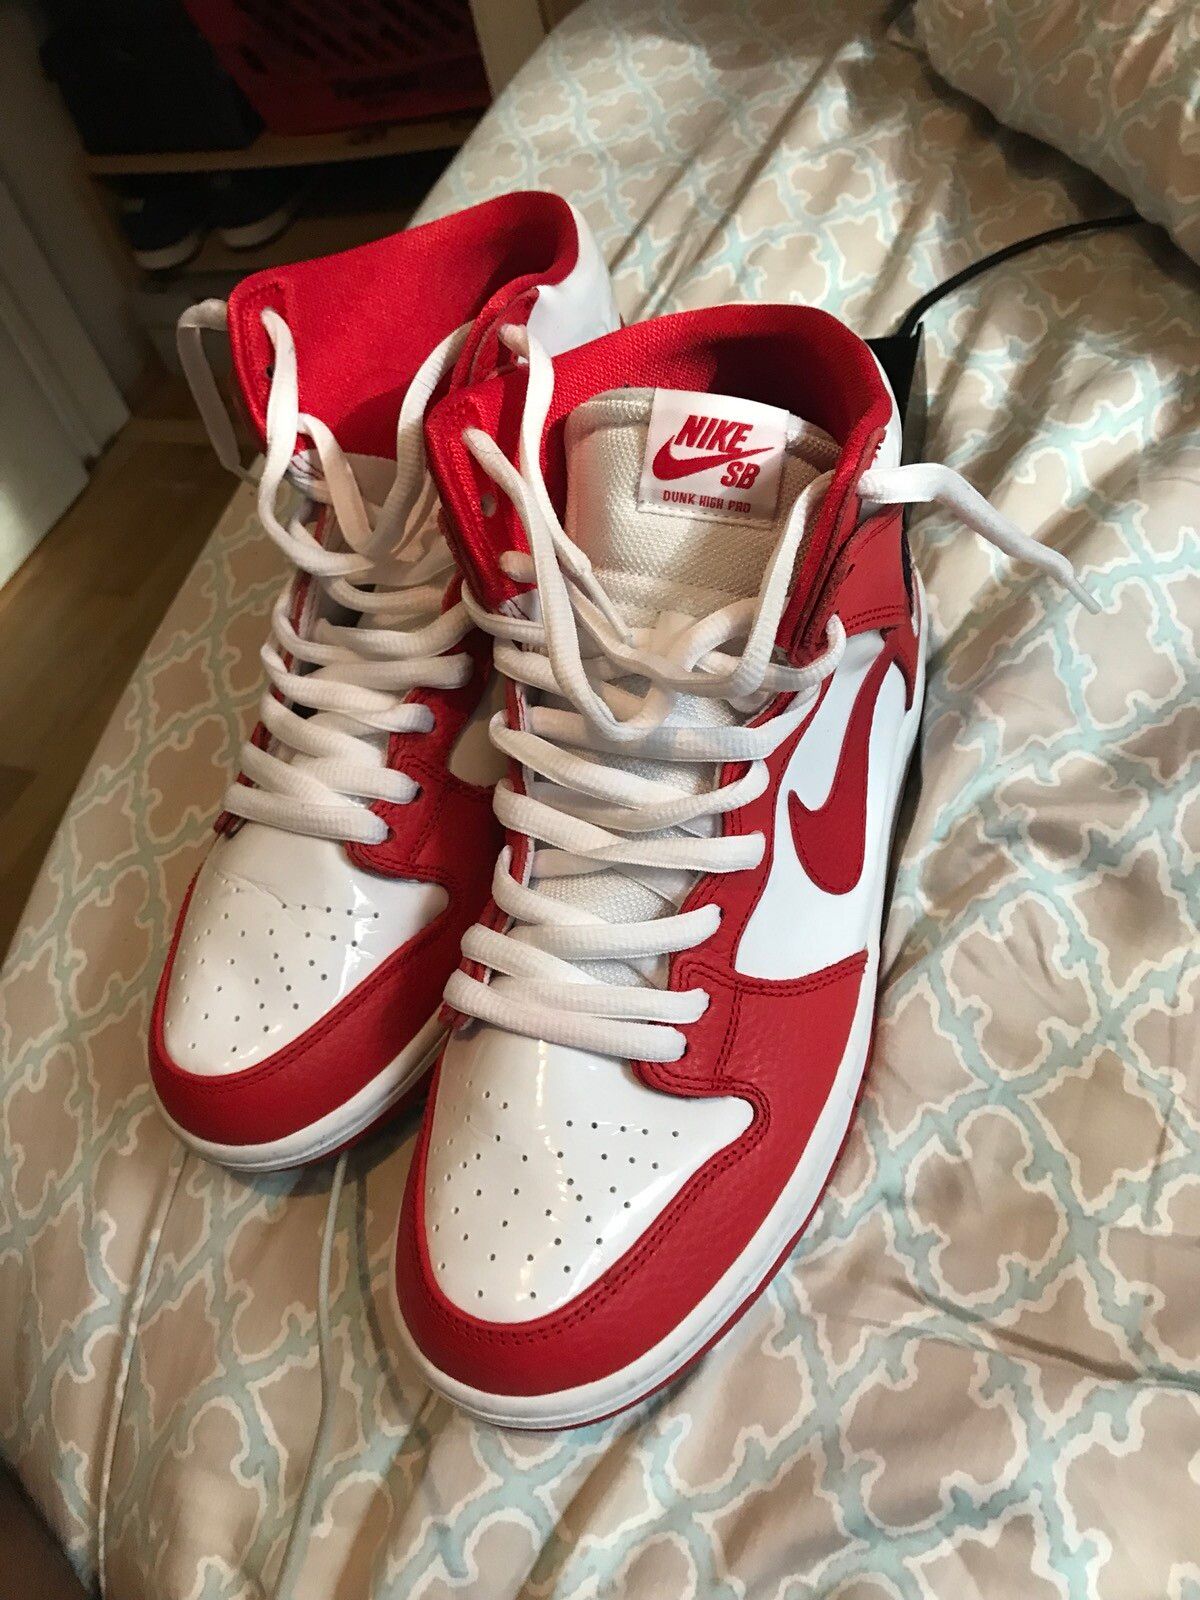 Pre-owned Nike Sb Shoes In Red